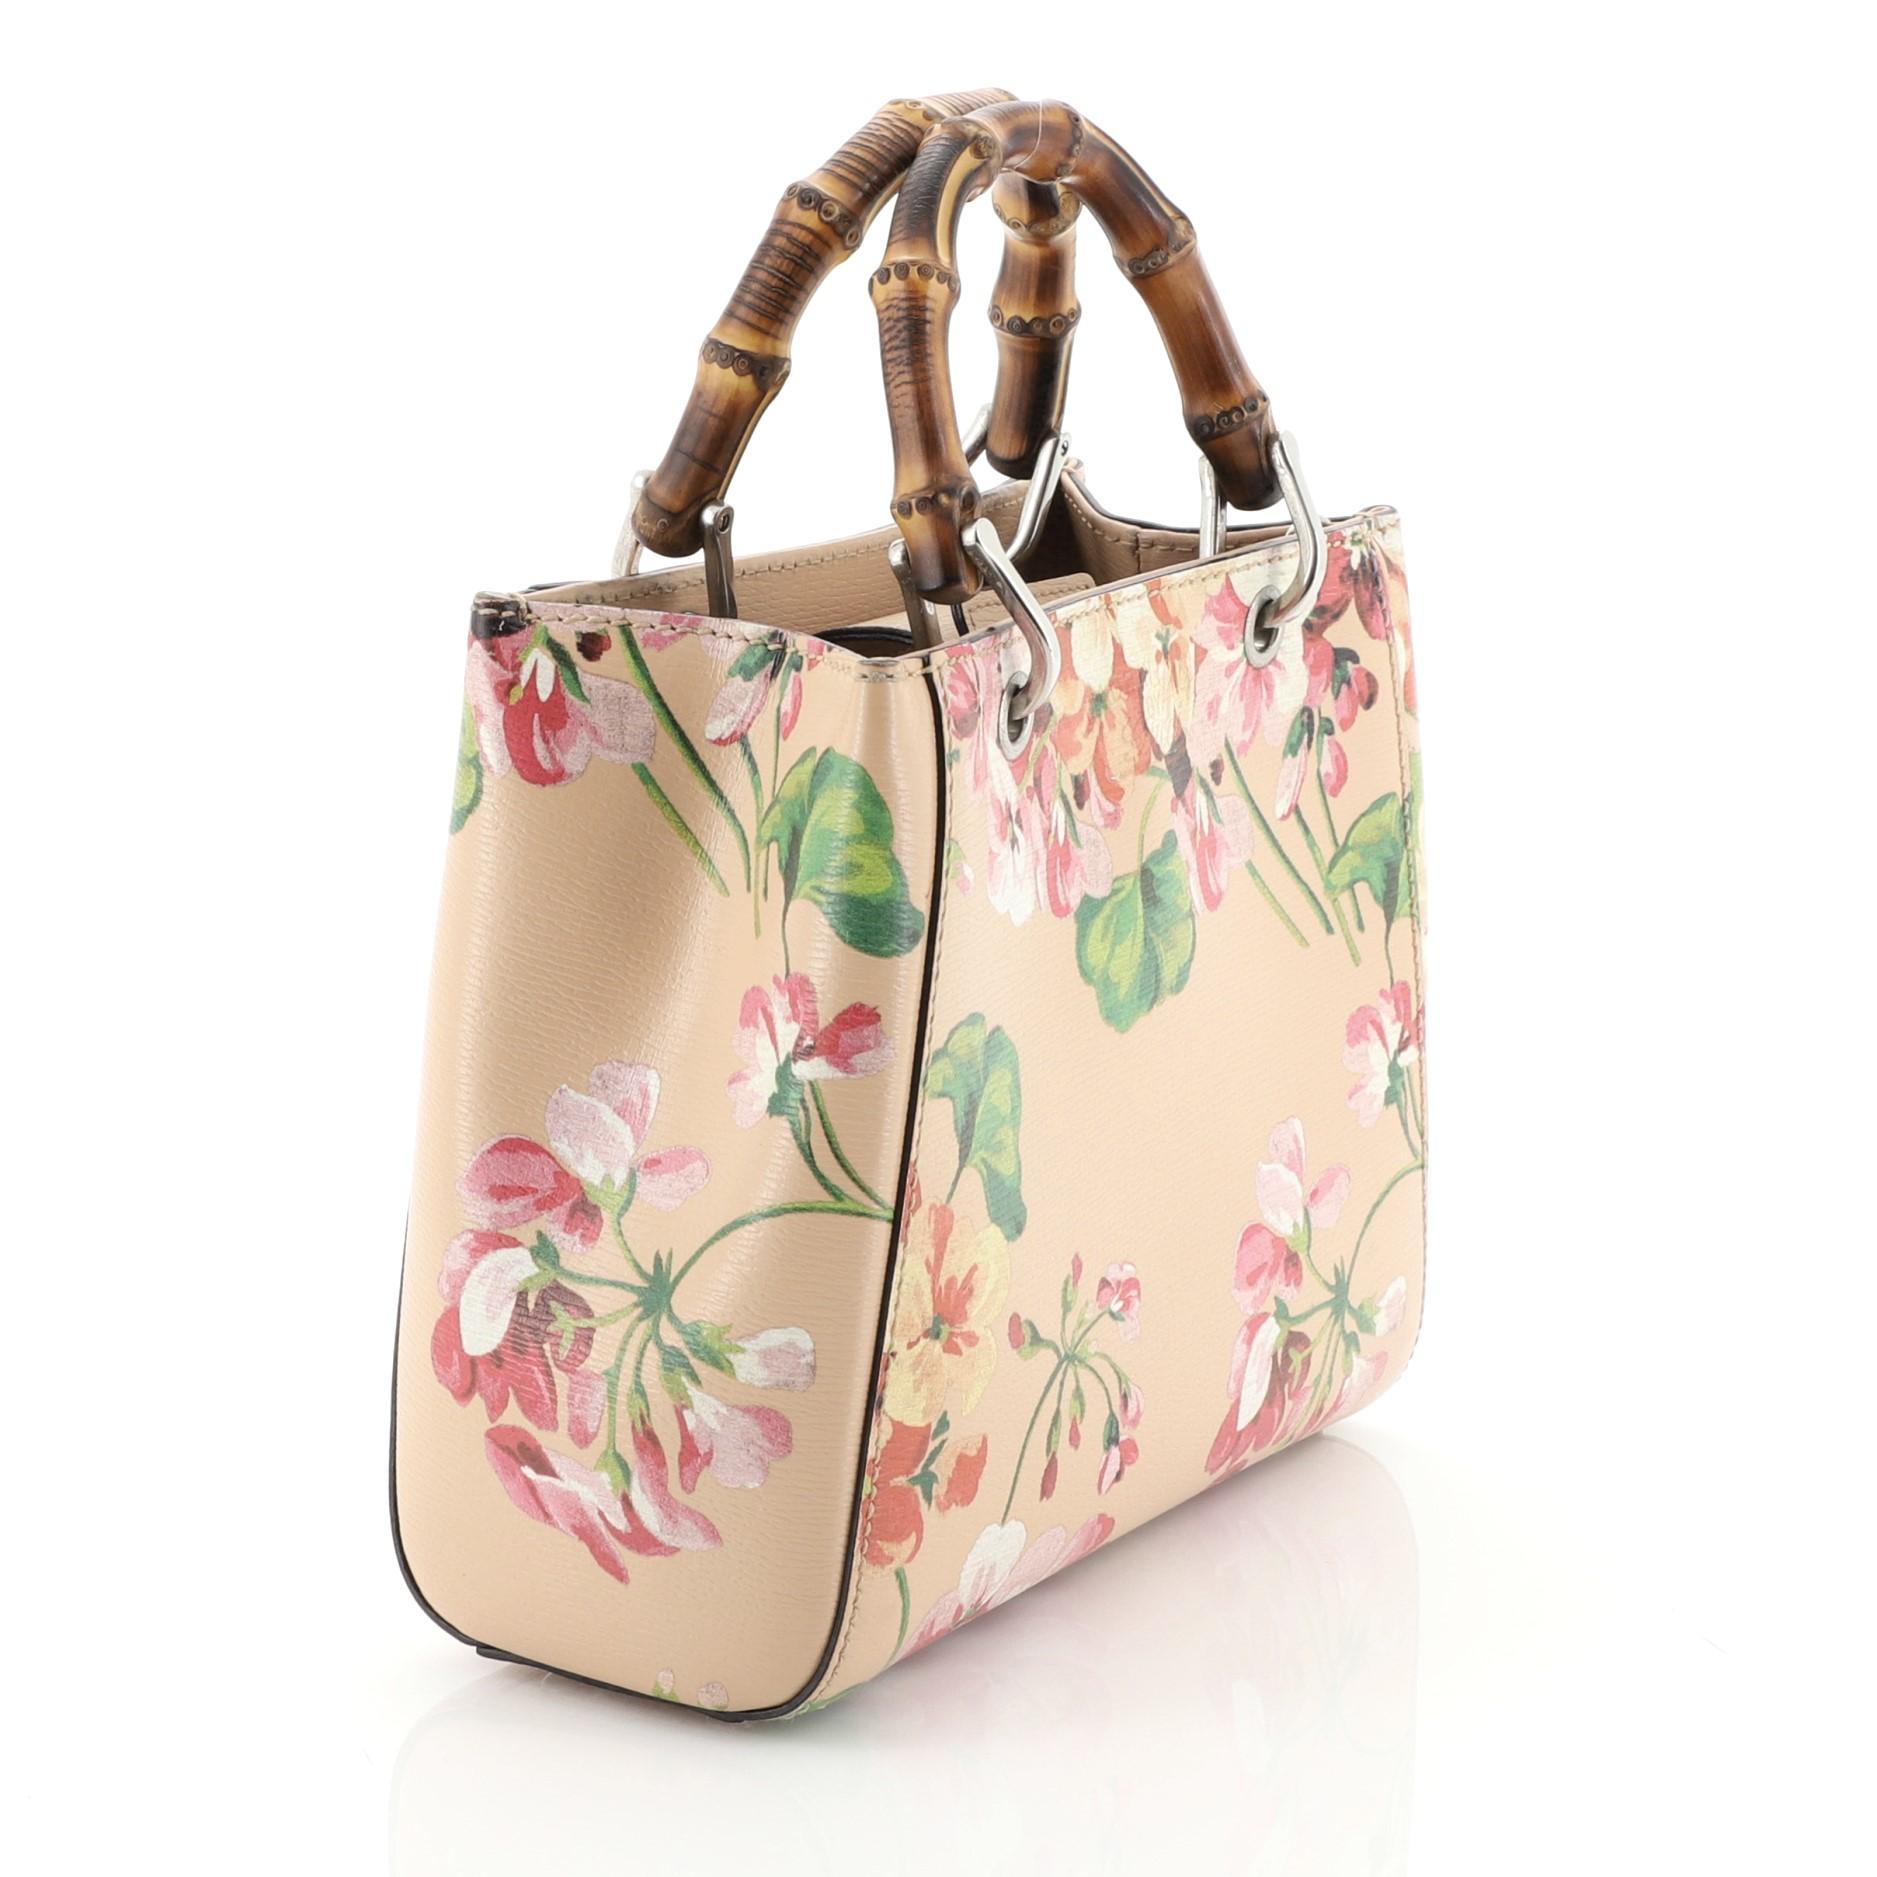 This Gucci Bamboo Shopper Tote Blooms Print Leather Mini, crafted from pink blooms print leather, features dual bamboo handles, stamped logo at the front, and aged silver-tone hardware. Its hidden magnetic snap closure opens to a neutral canvas